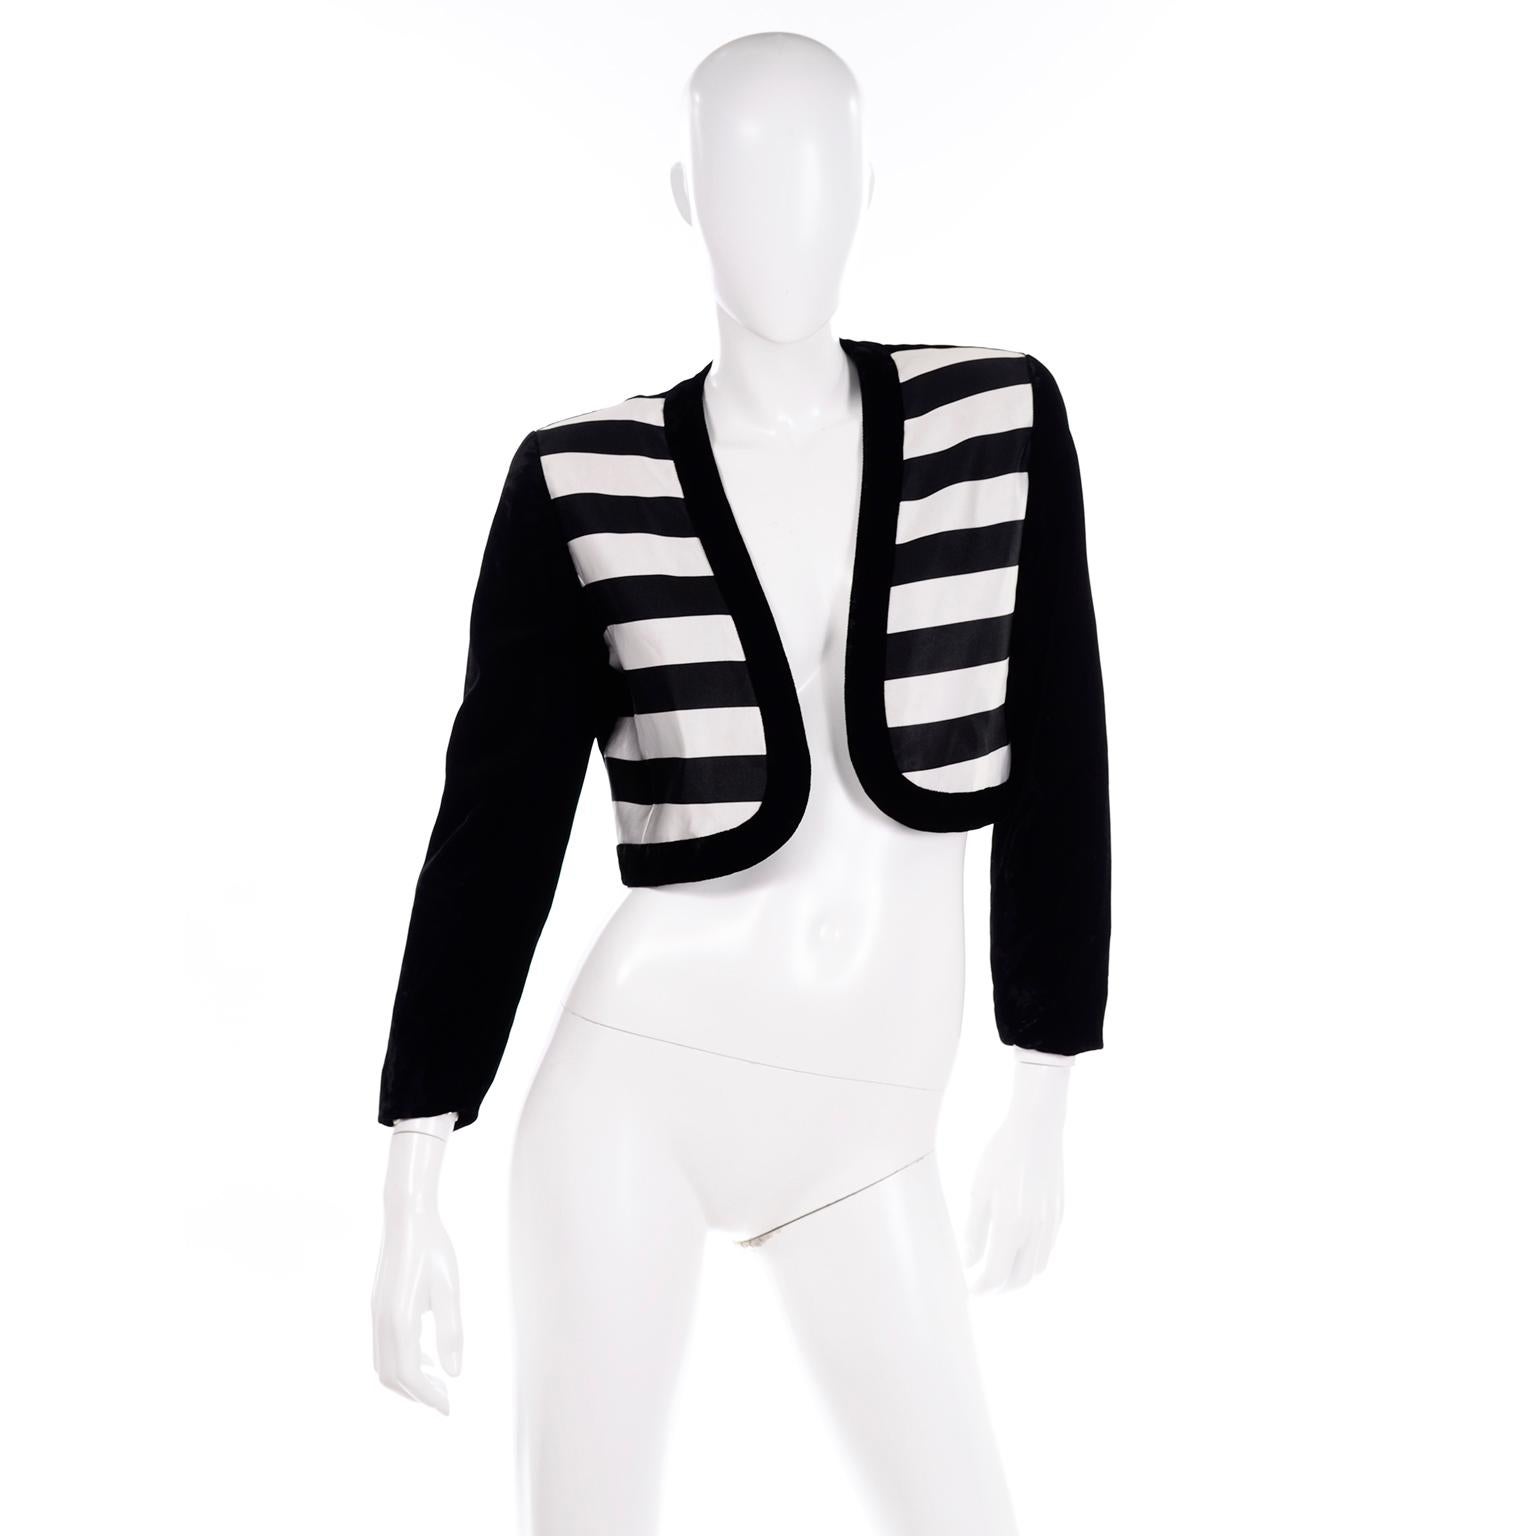 This is a great little vintage evening jacket by Escada Couture. It is black velvet with satin panels in front that form black and white thick horizontal stripes. It is open in front with  no closures, and the hemline curves in front for a very